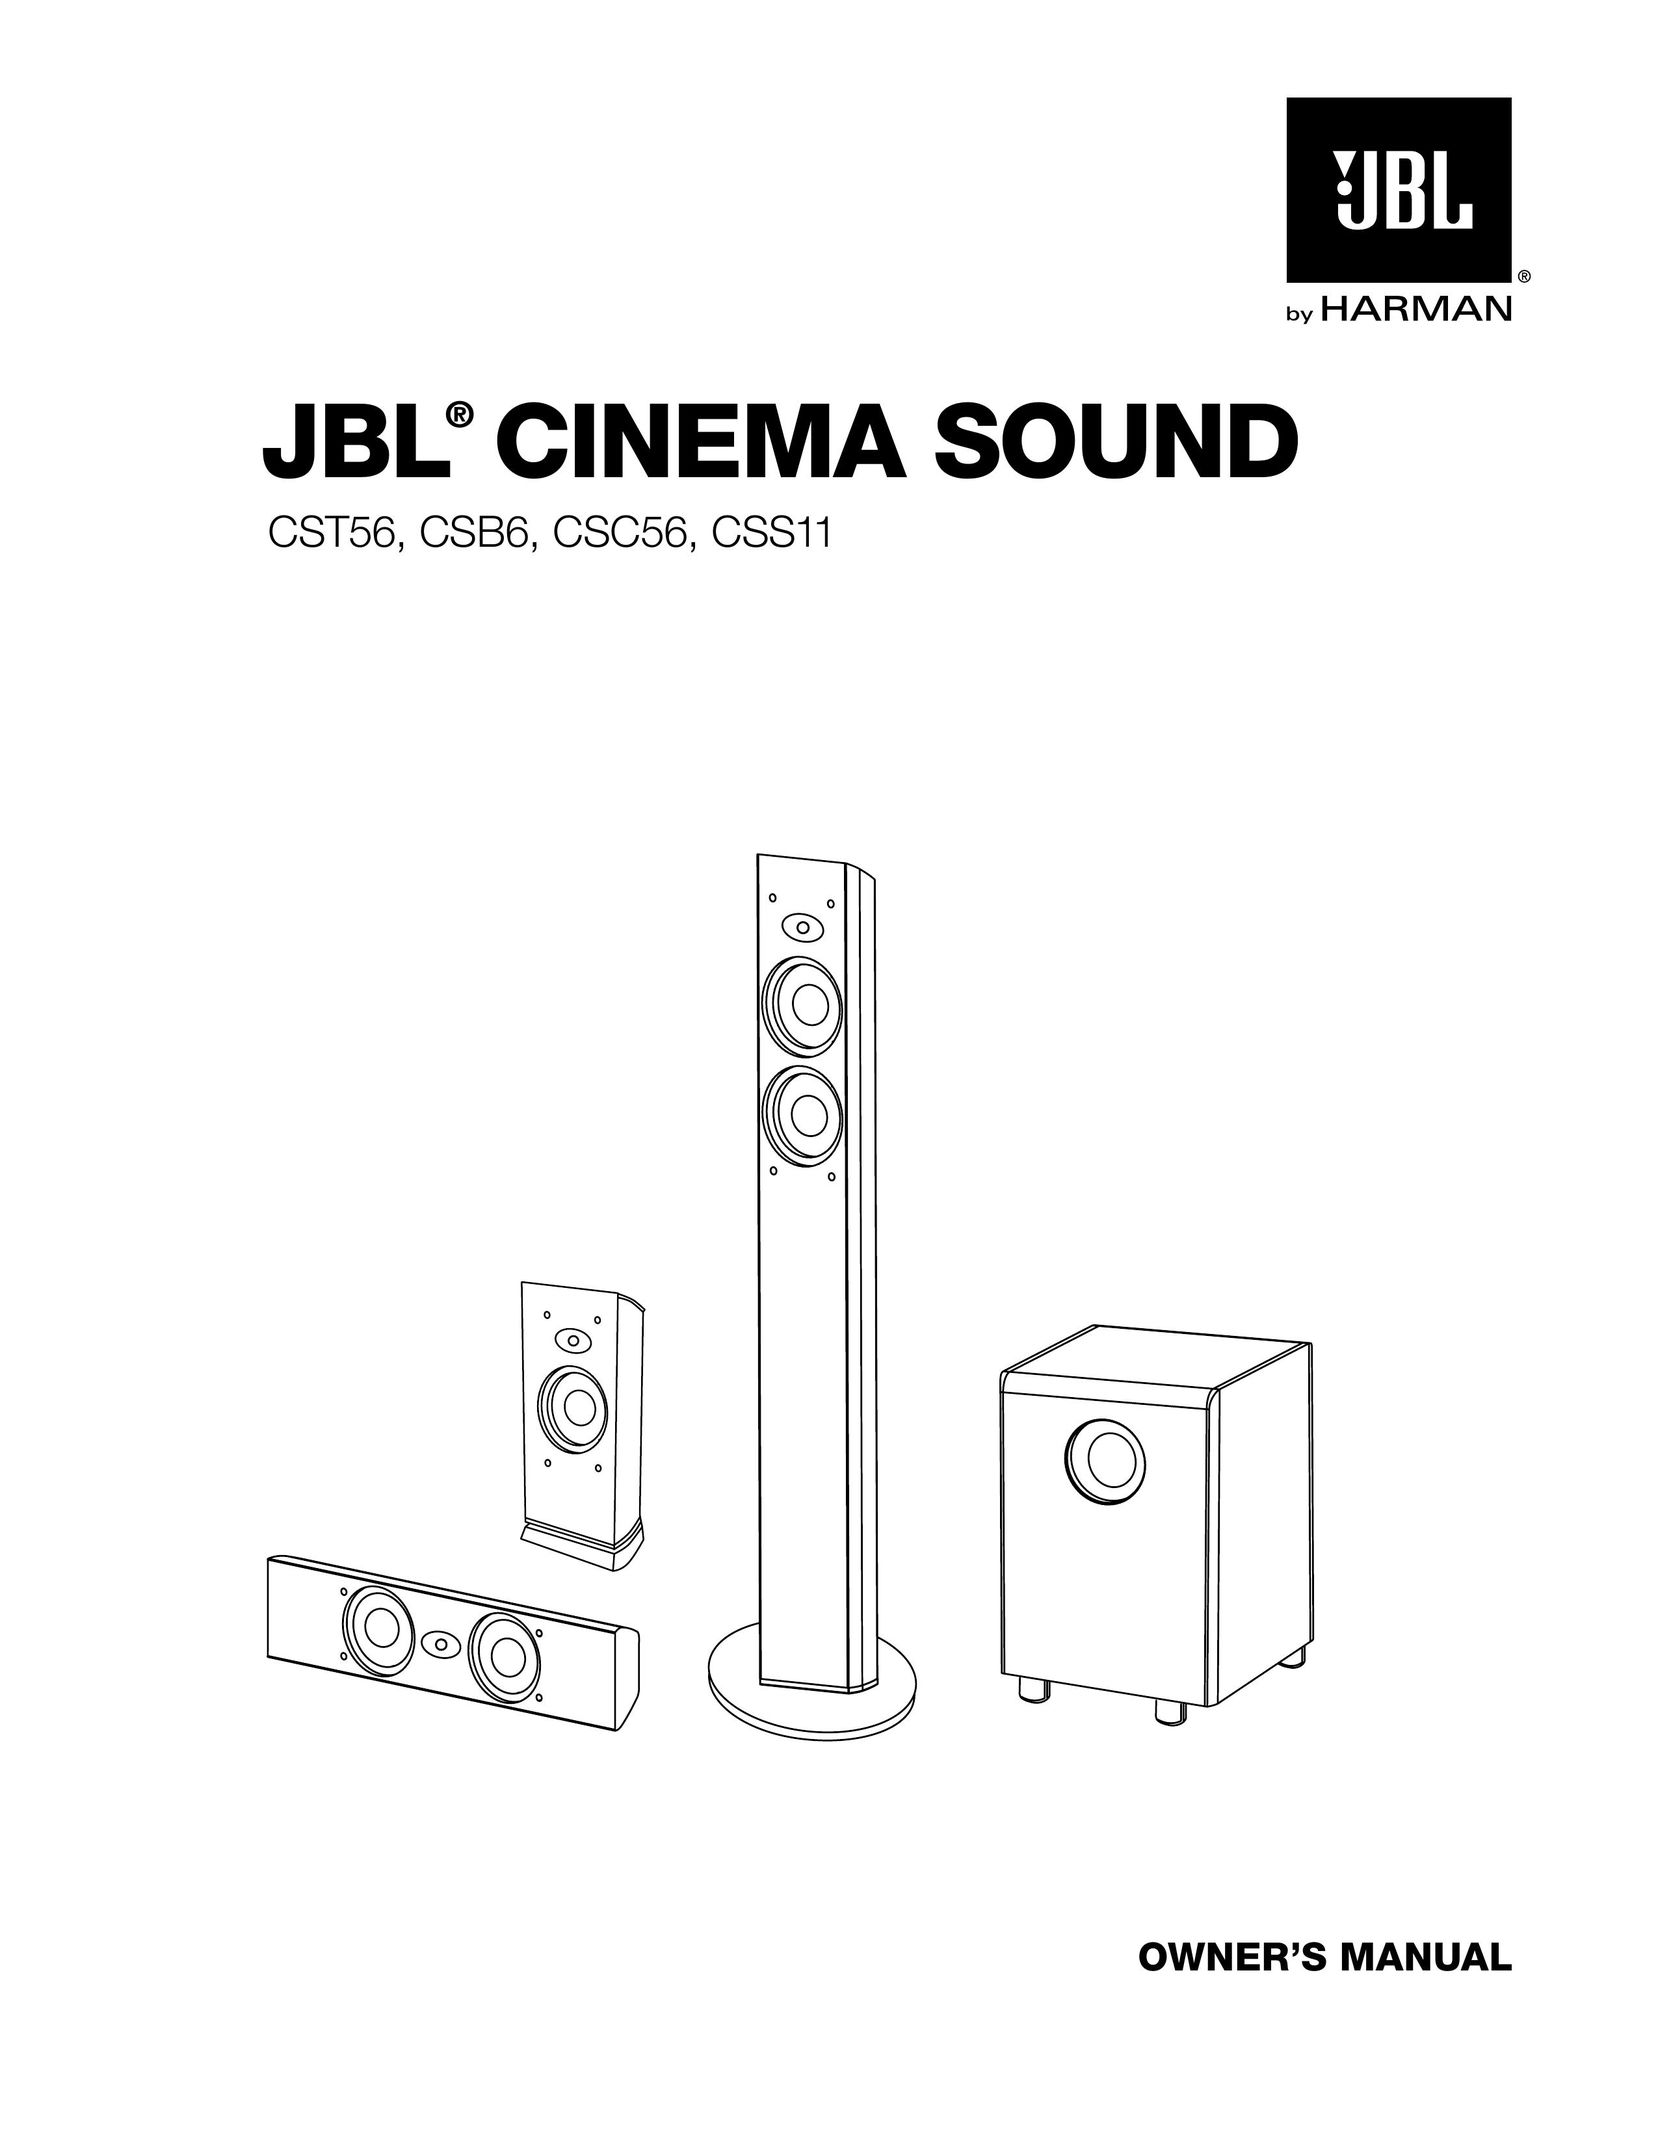 JBL CSS11 Home Theater System User Manual